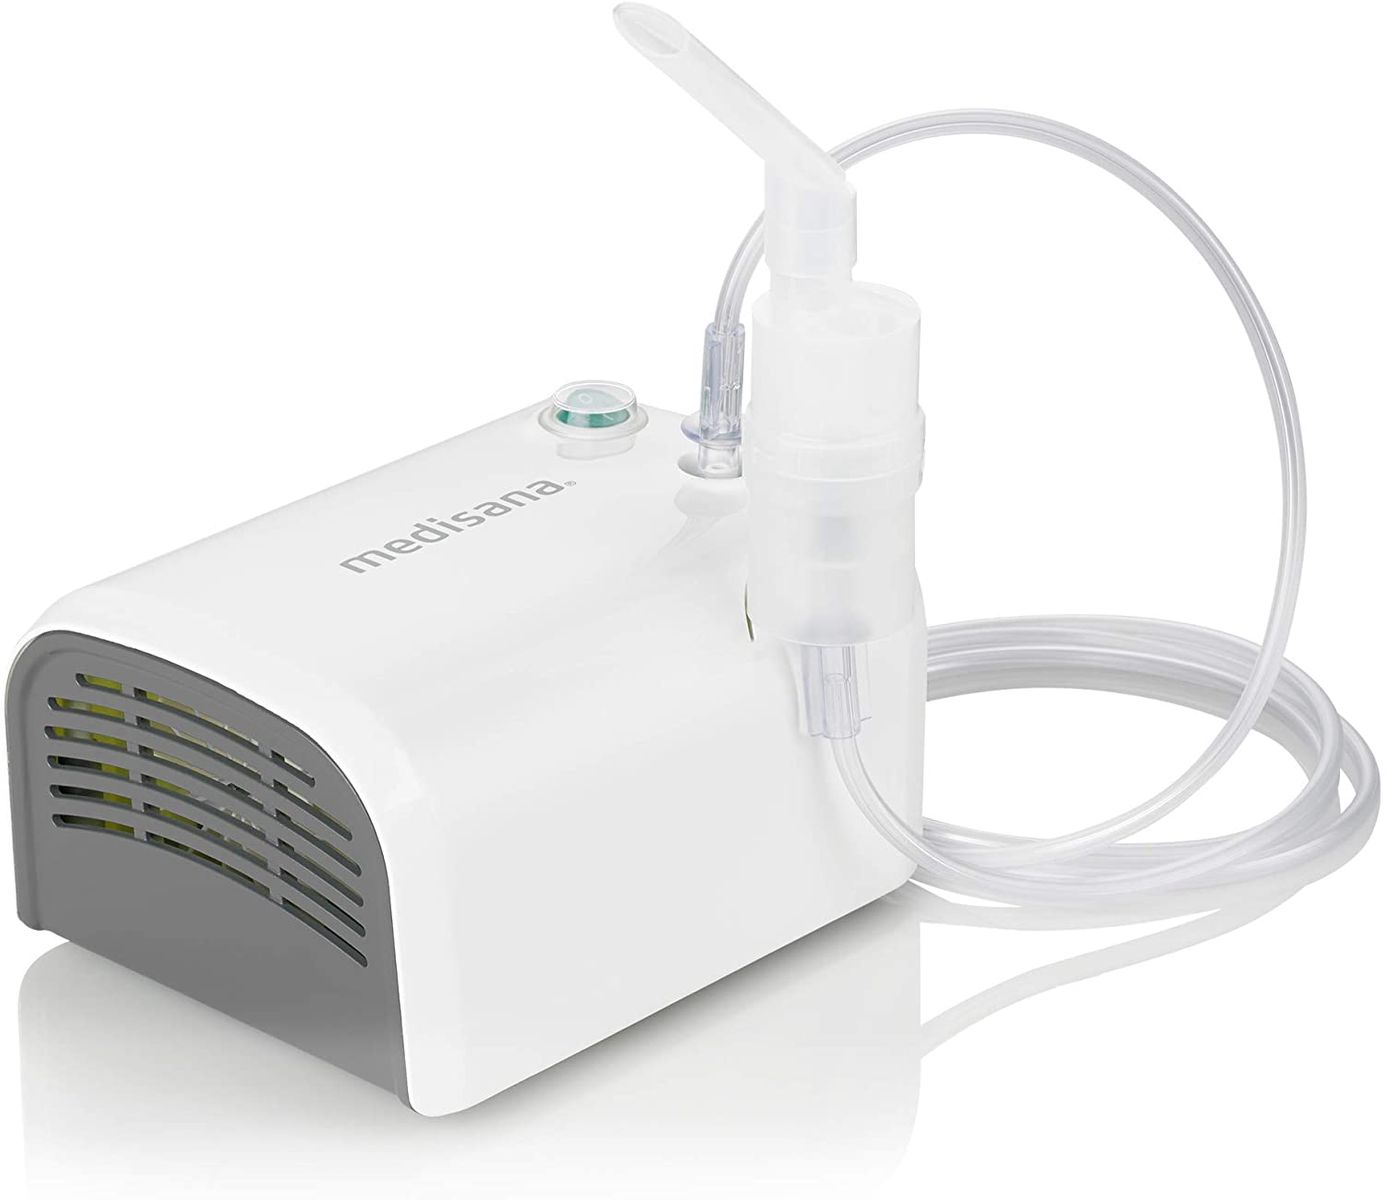 Medisana IN 520 portable inhaler for on the go, compressor nebulizer with mouthpiece and mask for adults and children, for colds or asthma with extensive accessories power operation